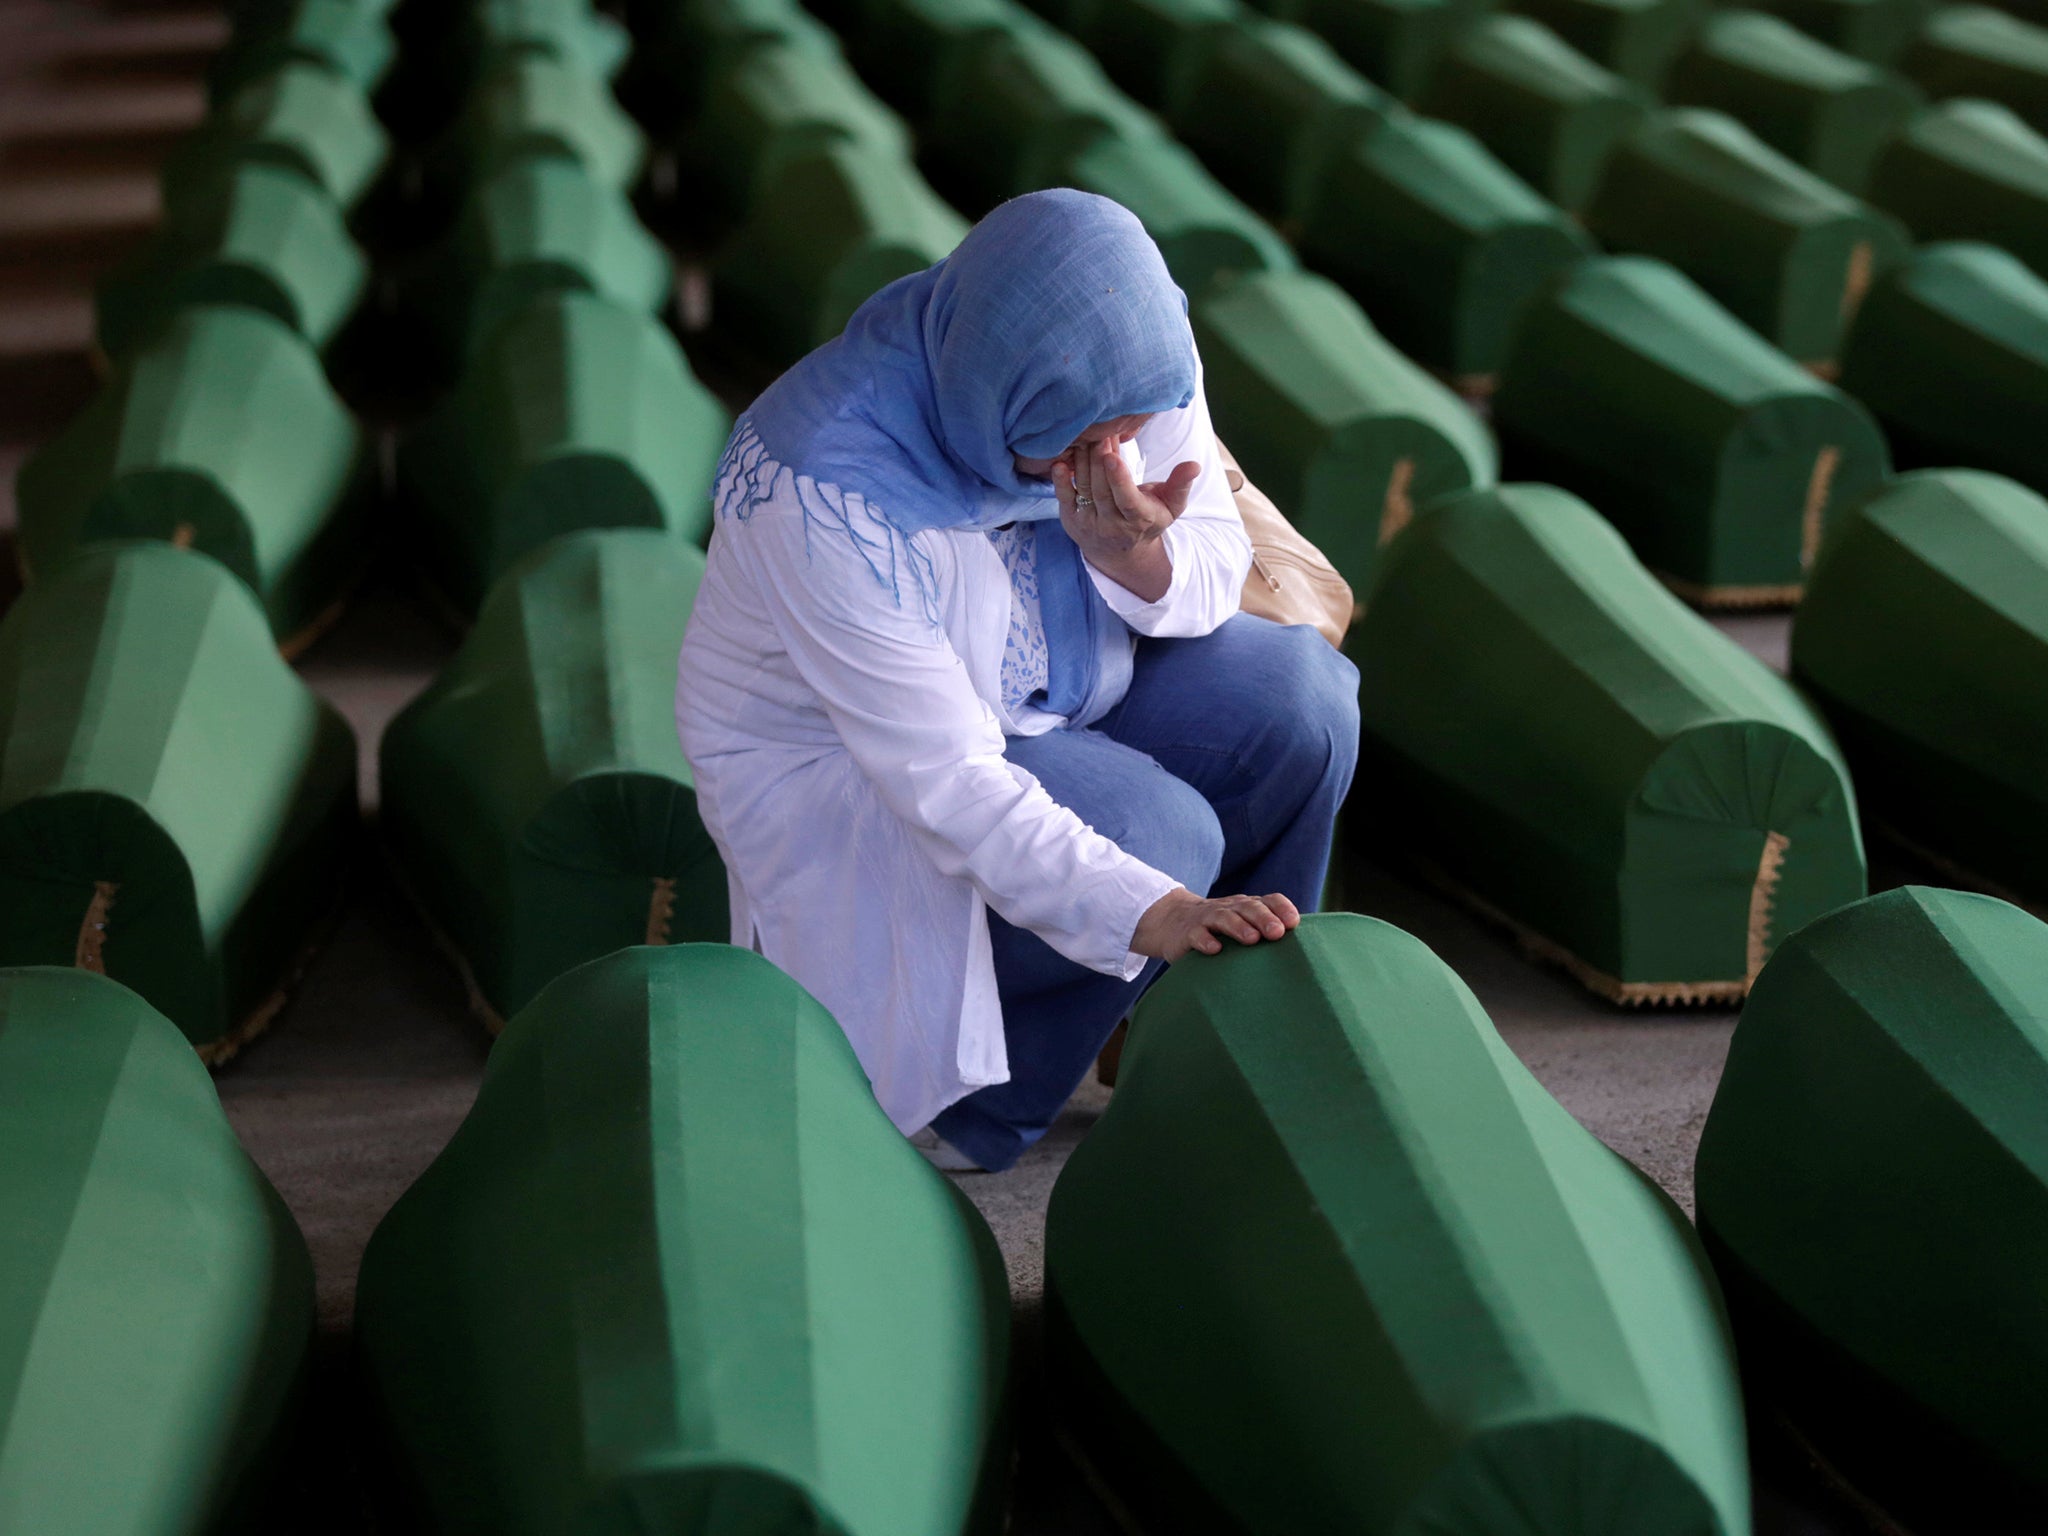 A women weeps next to the remains of 127 victims of the Srebrenica massacre